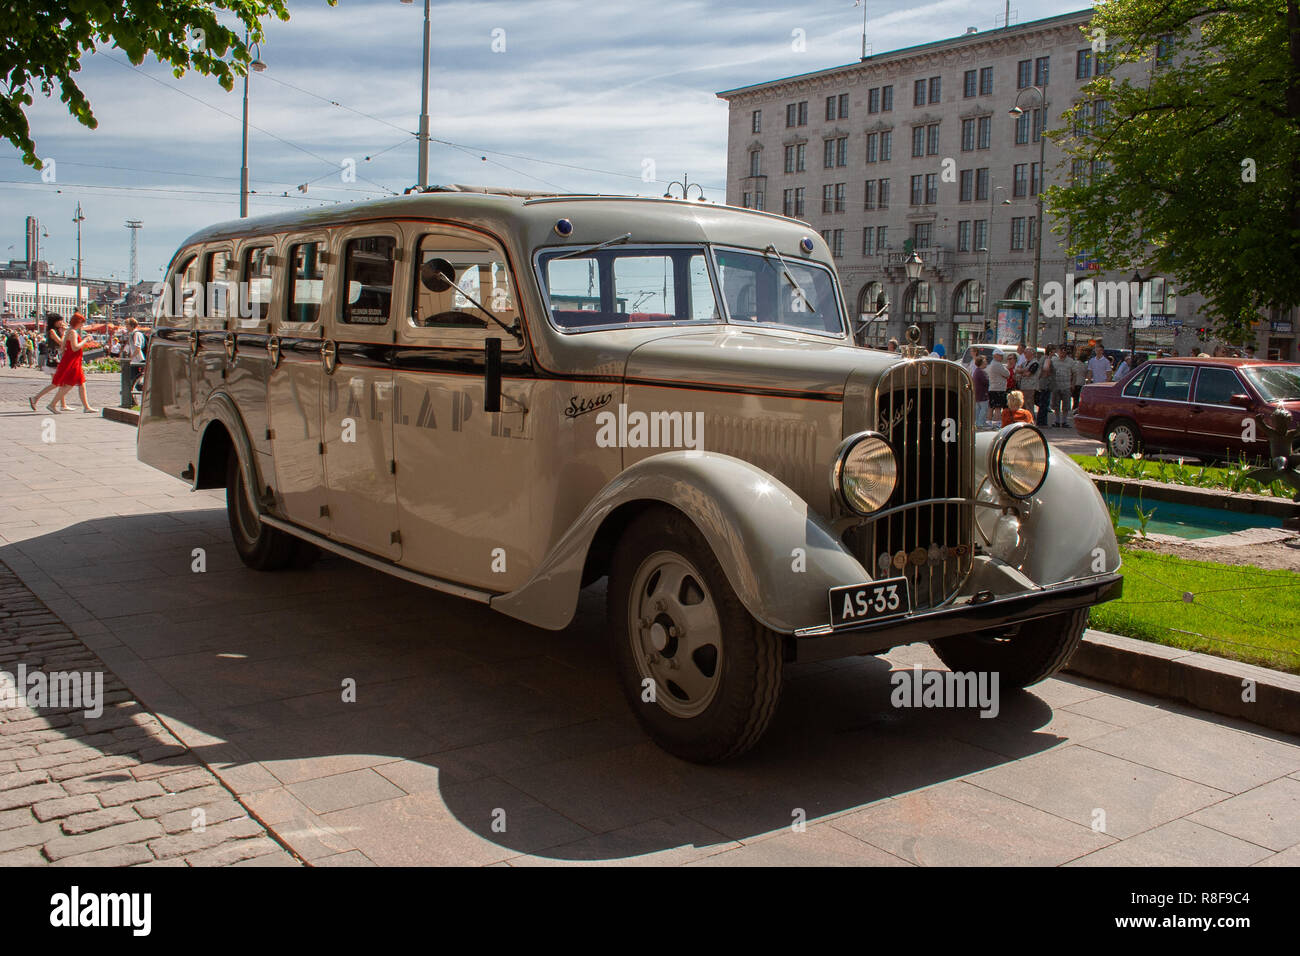 Historic vehicle, Sisu 322 bus from the year 1933 restored to its appearance while serving the Helsinki Jazz band 'Dallapé'. Stock Photo